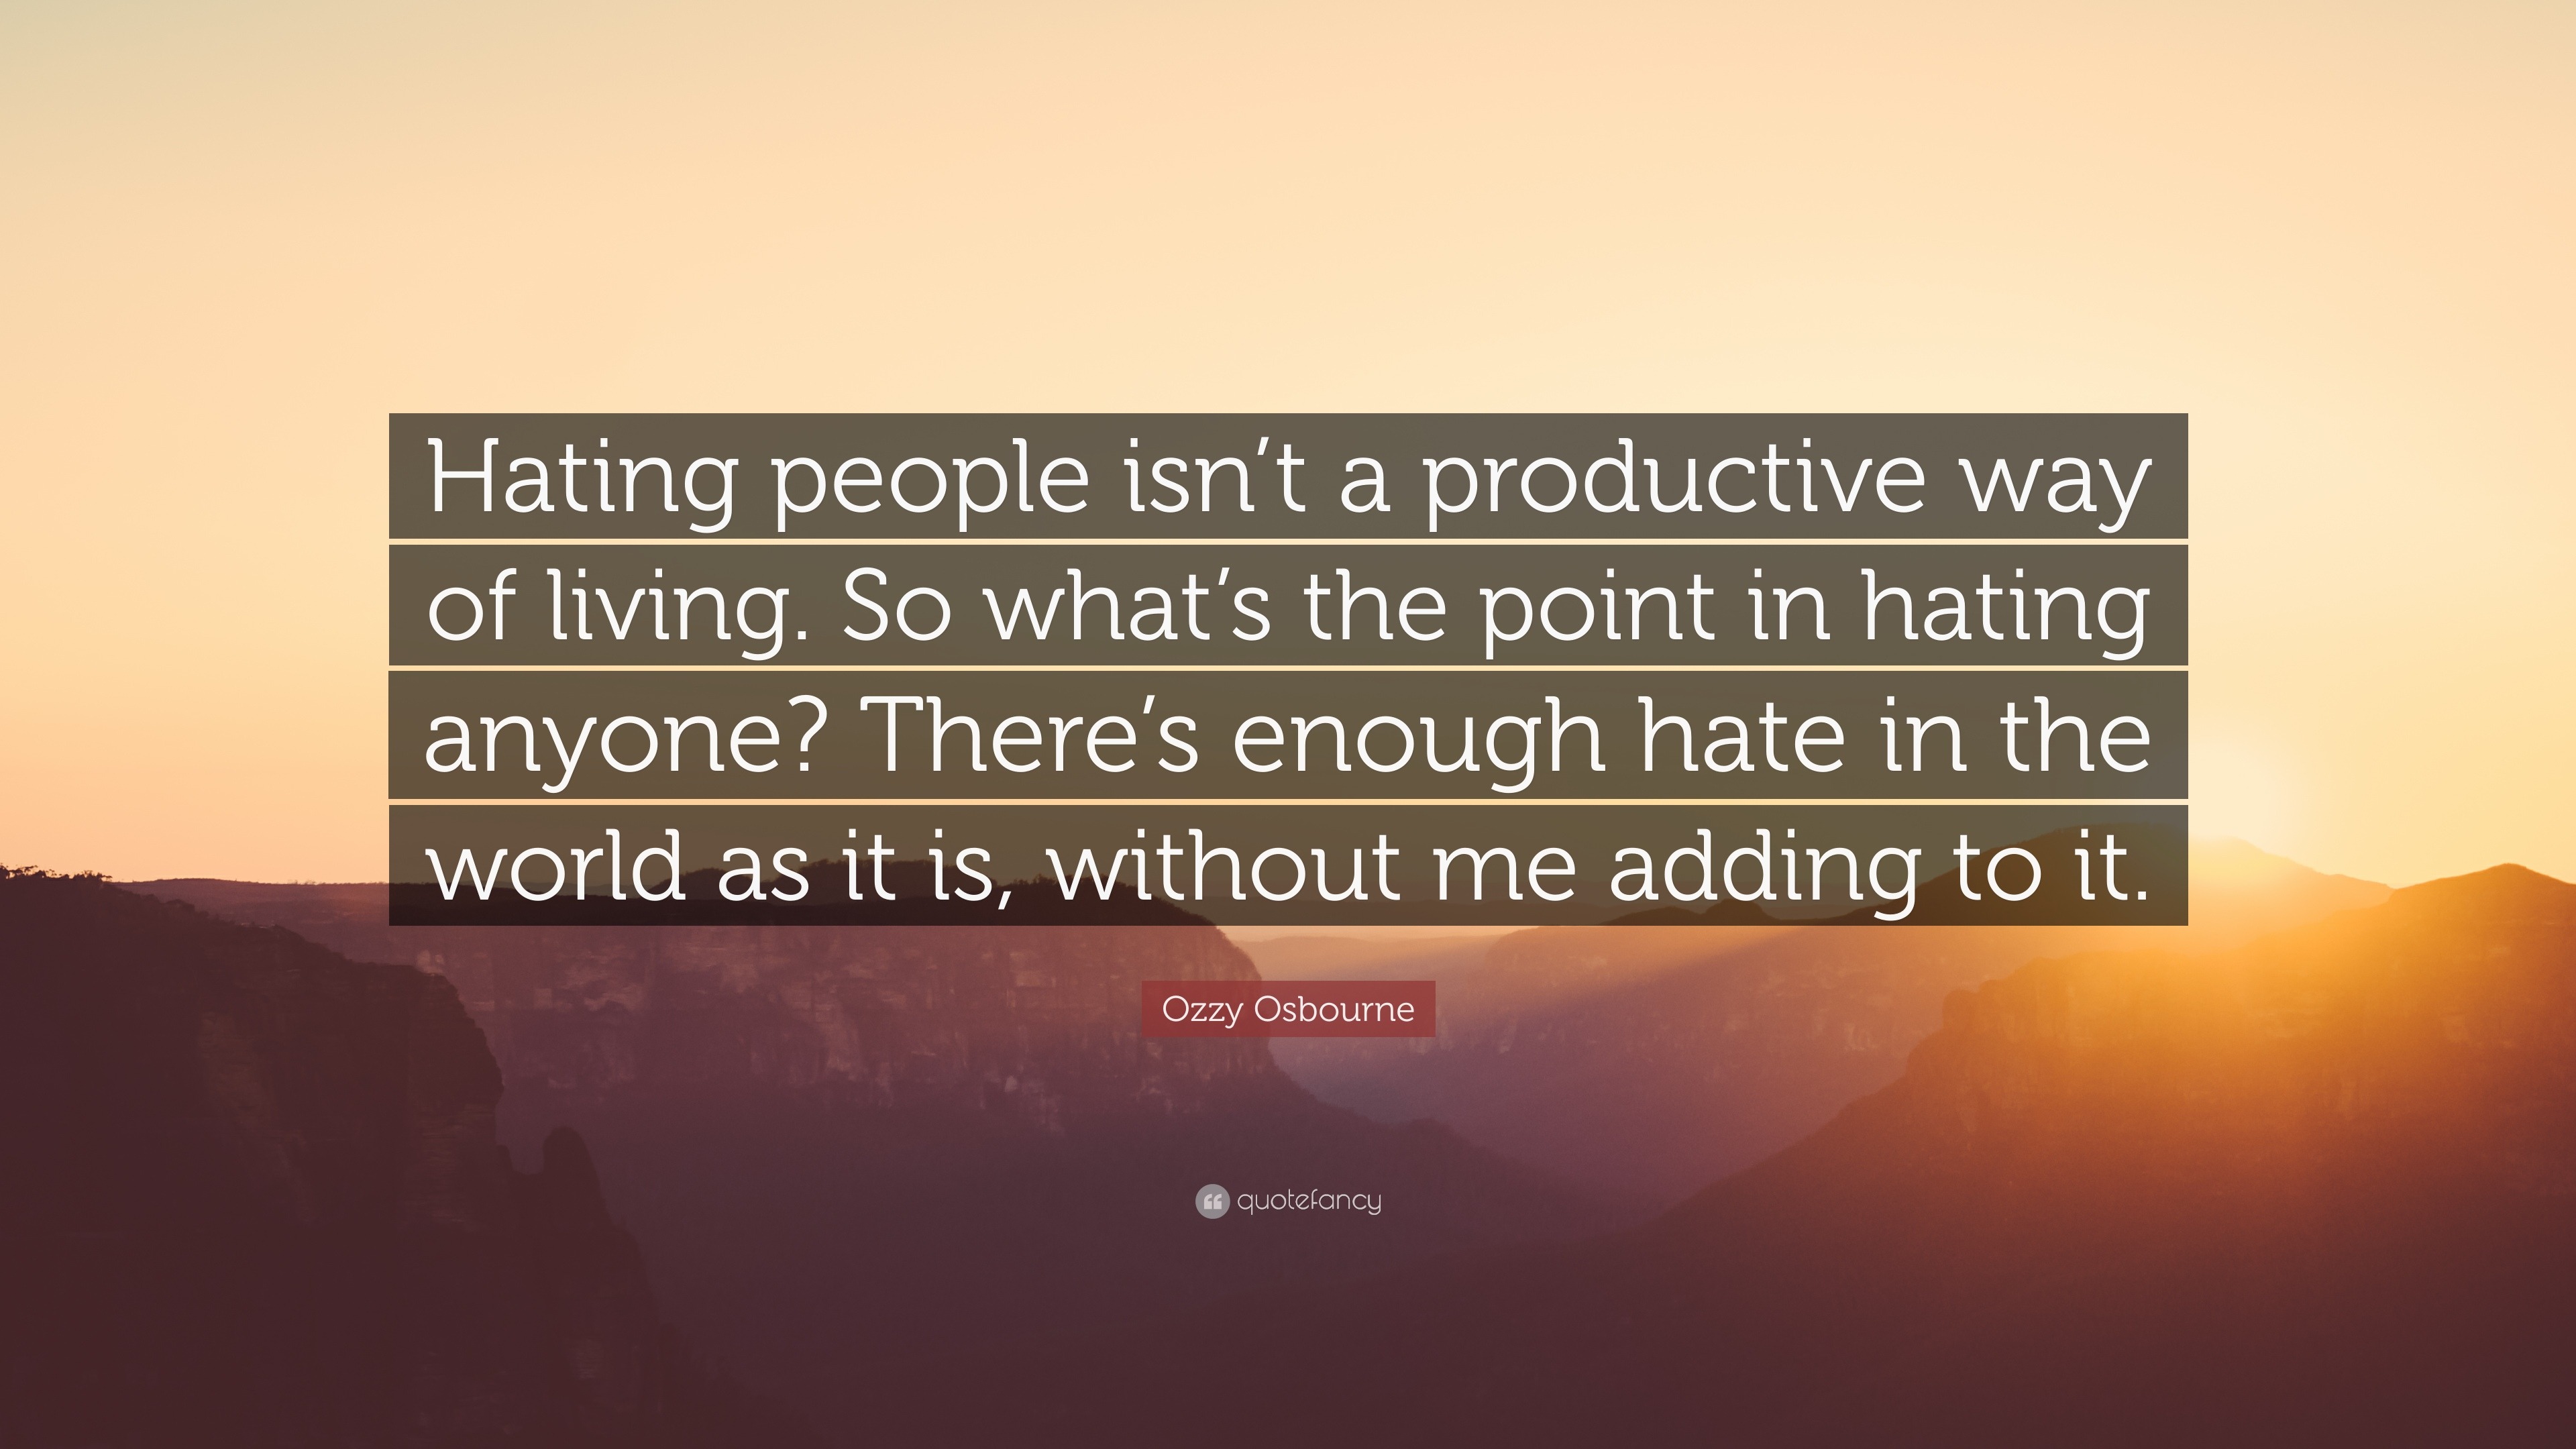 Hating people isn’t a productive way of living. 